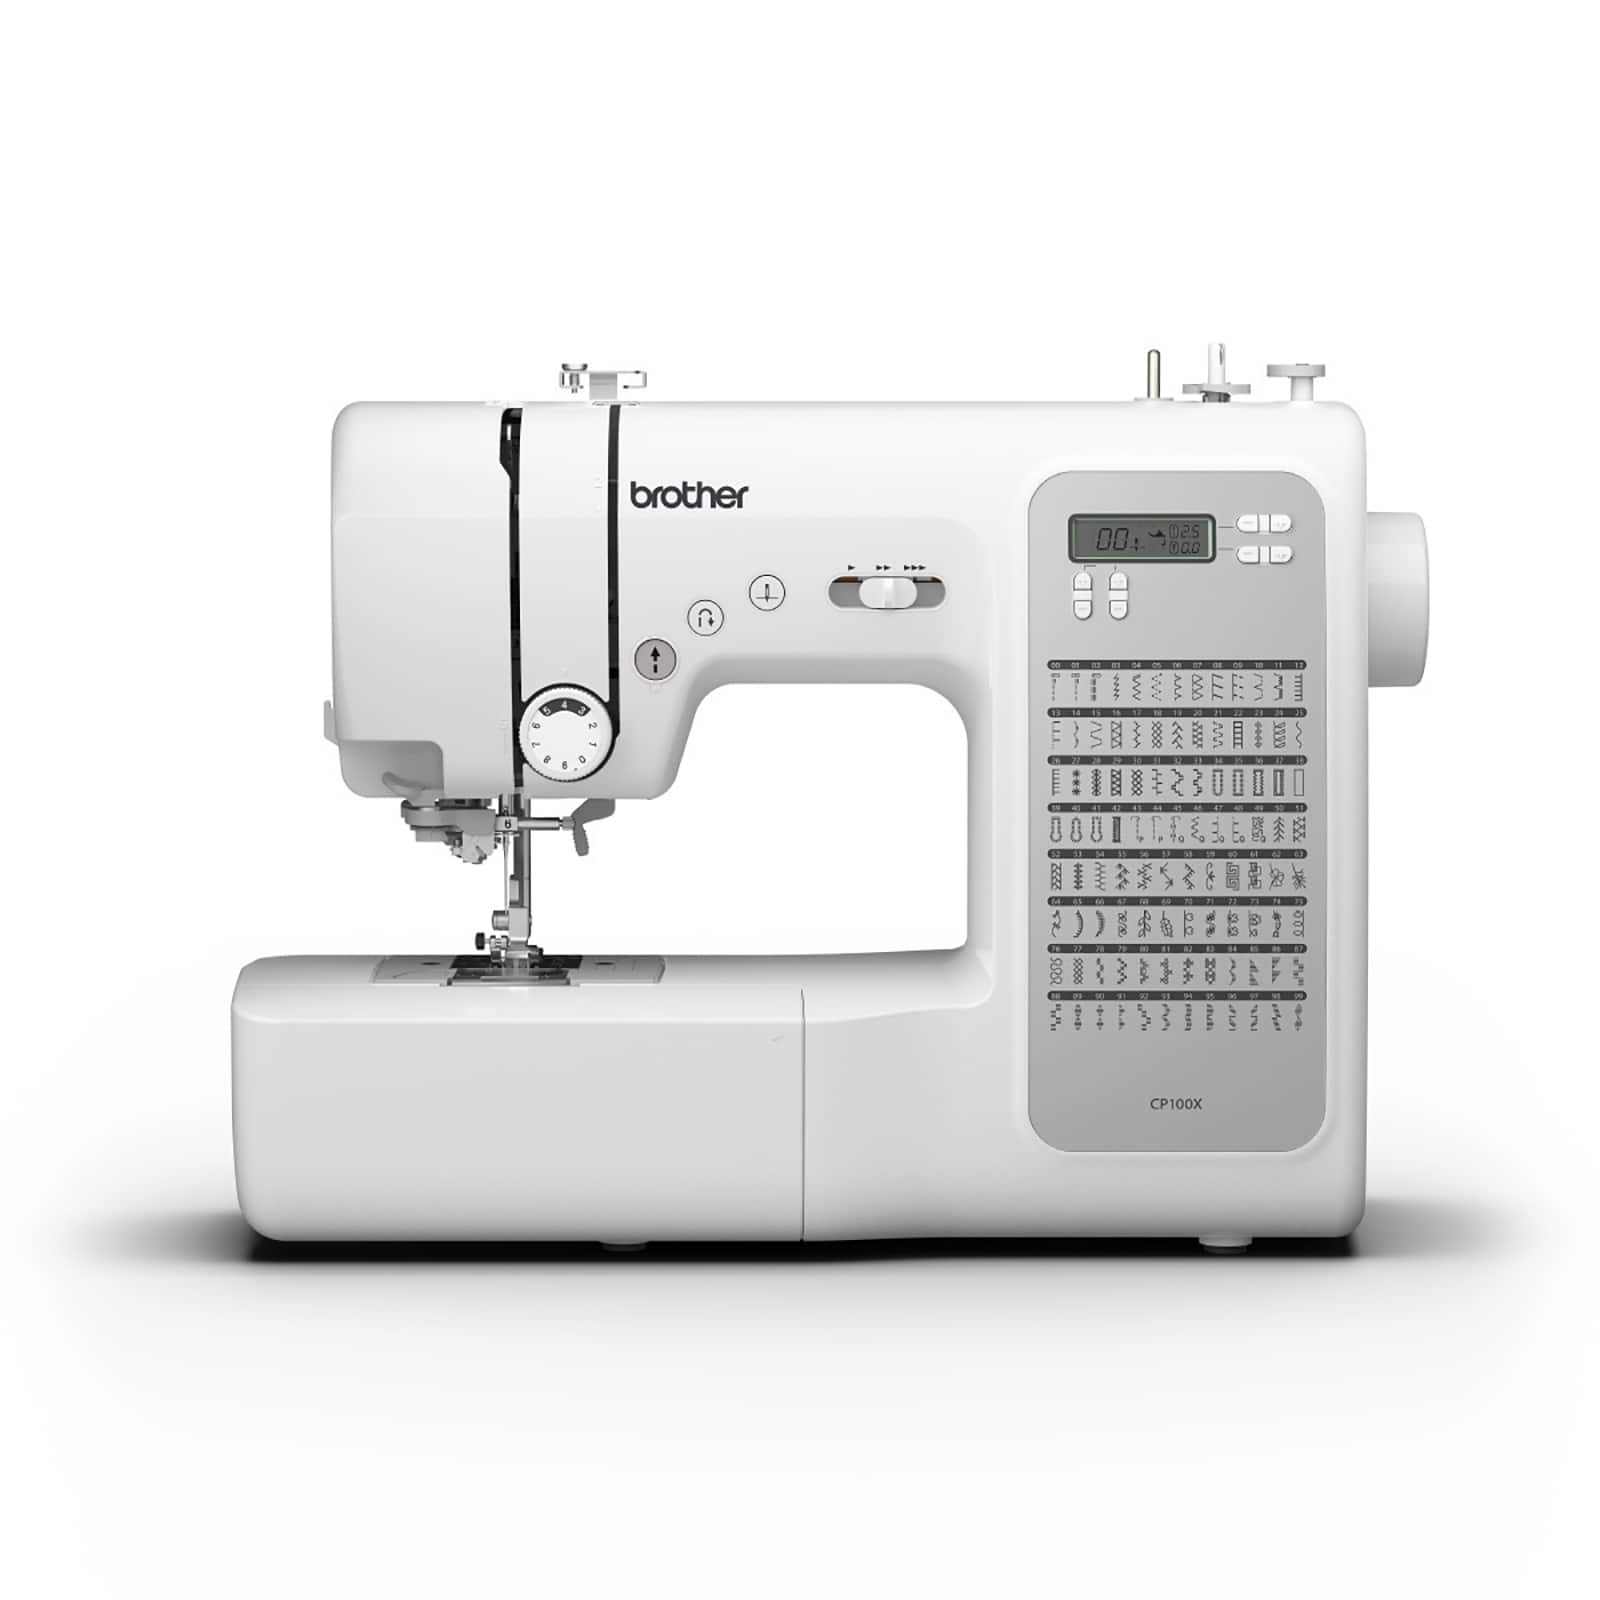 Loops & Threads 10 Piece Sewing Machine in White